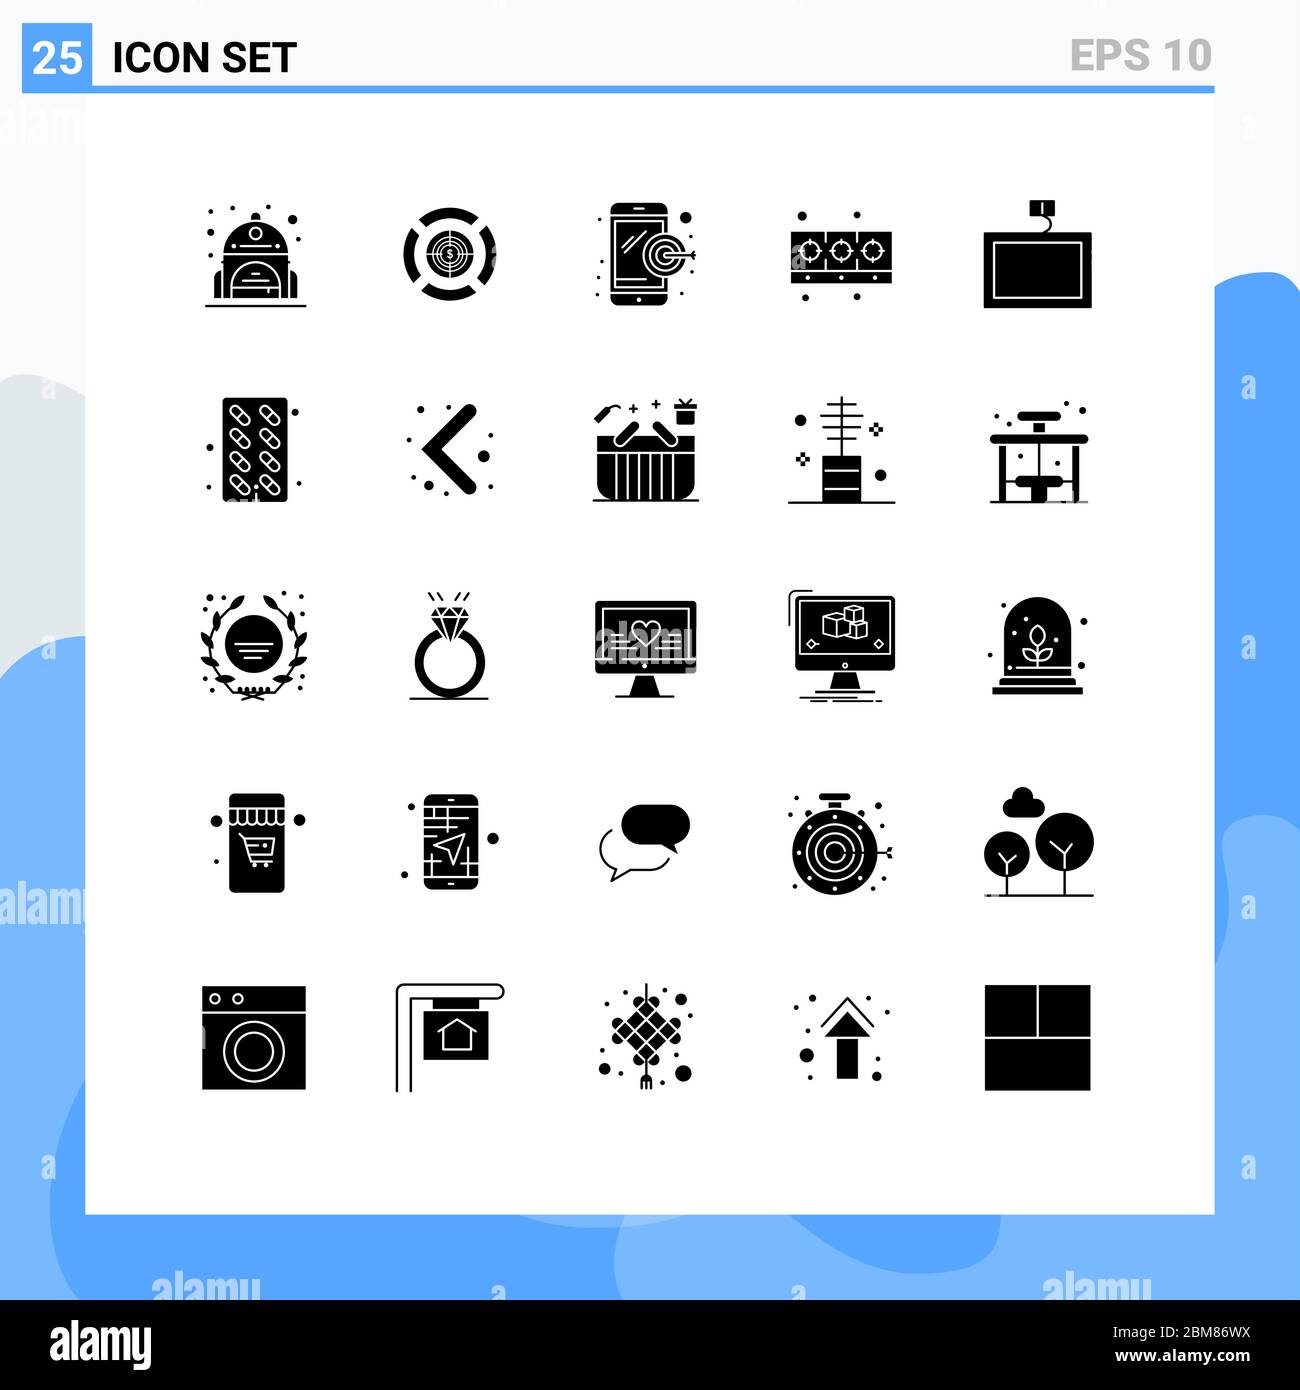 25 Creative Icons Modern Signs and Symbols of capsule, tv, digital marketing, mount, food Editable Vector Design Elements Stock Vector